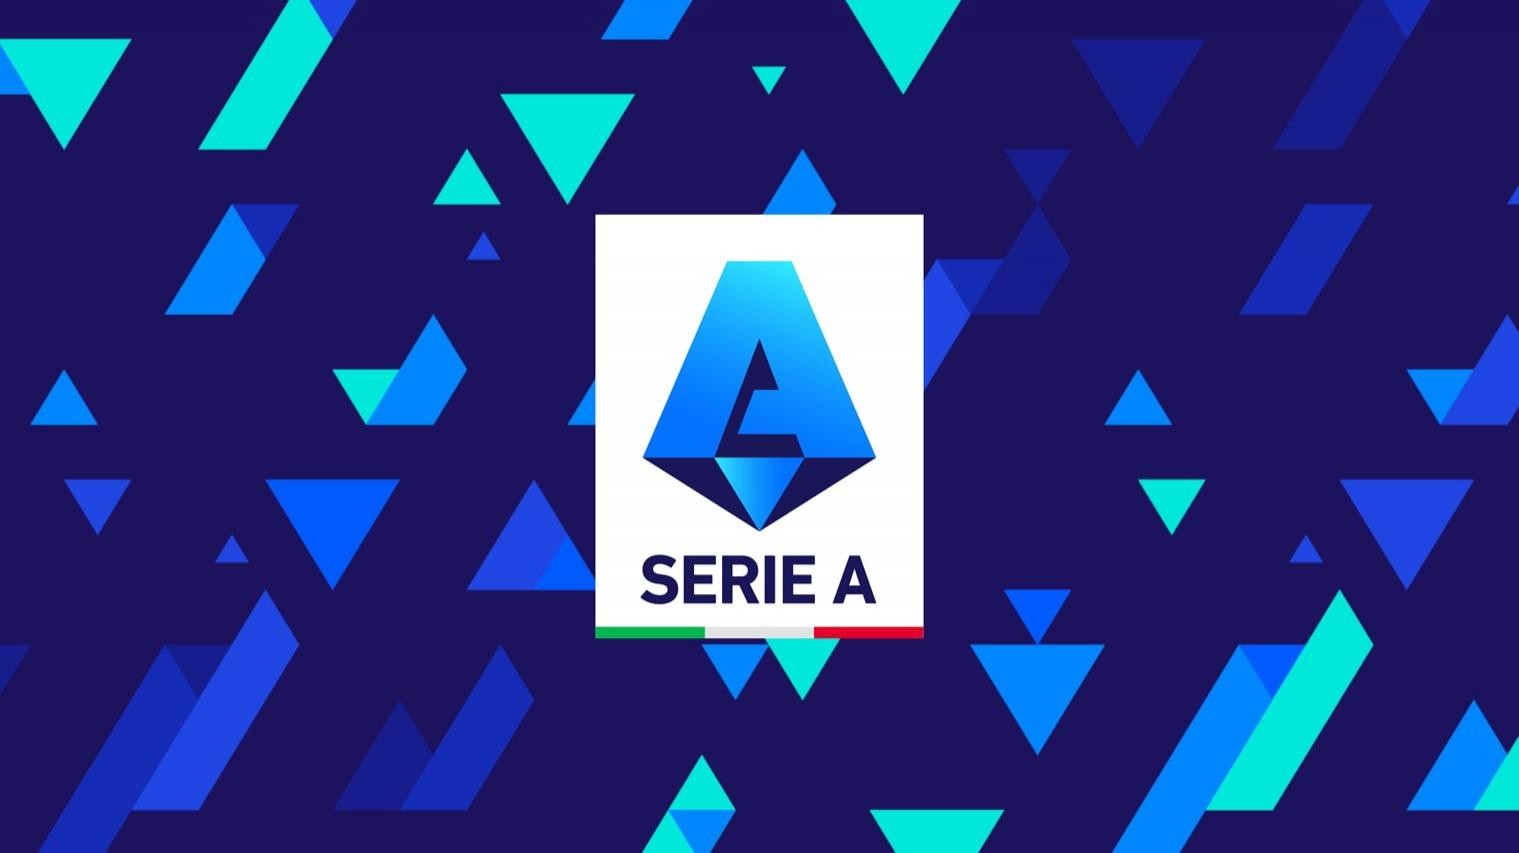 LEGA SERIE A UTILIZING AI TECHNOLOGY BY WSC SPORTS TO CREATE REAL-TIME HIGHLIGHTS TO REACH AND ENGAGE GLOBAL FANBASE